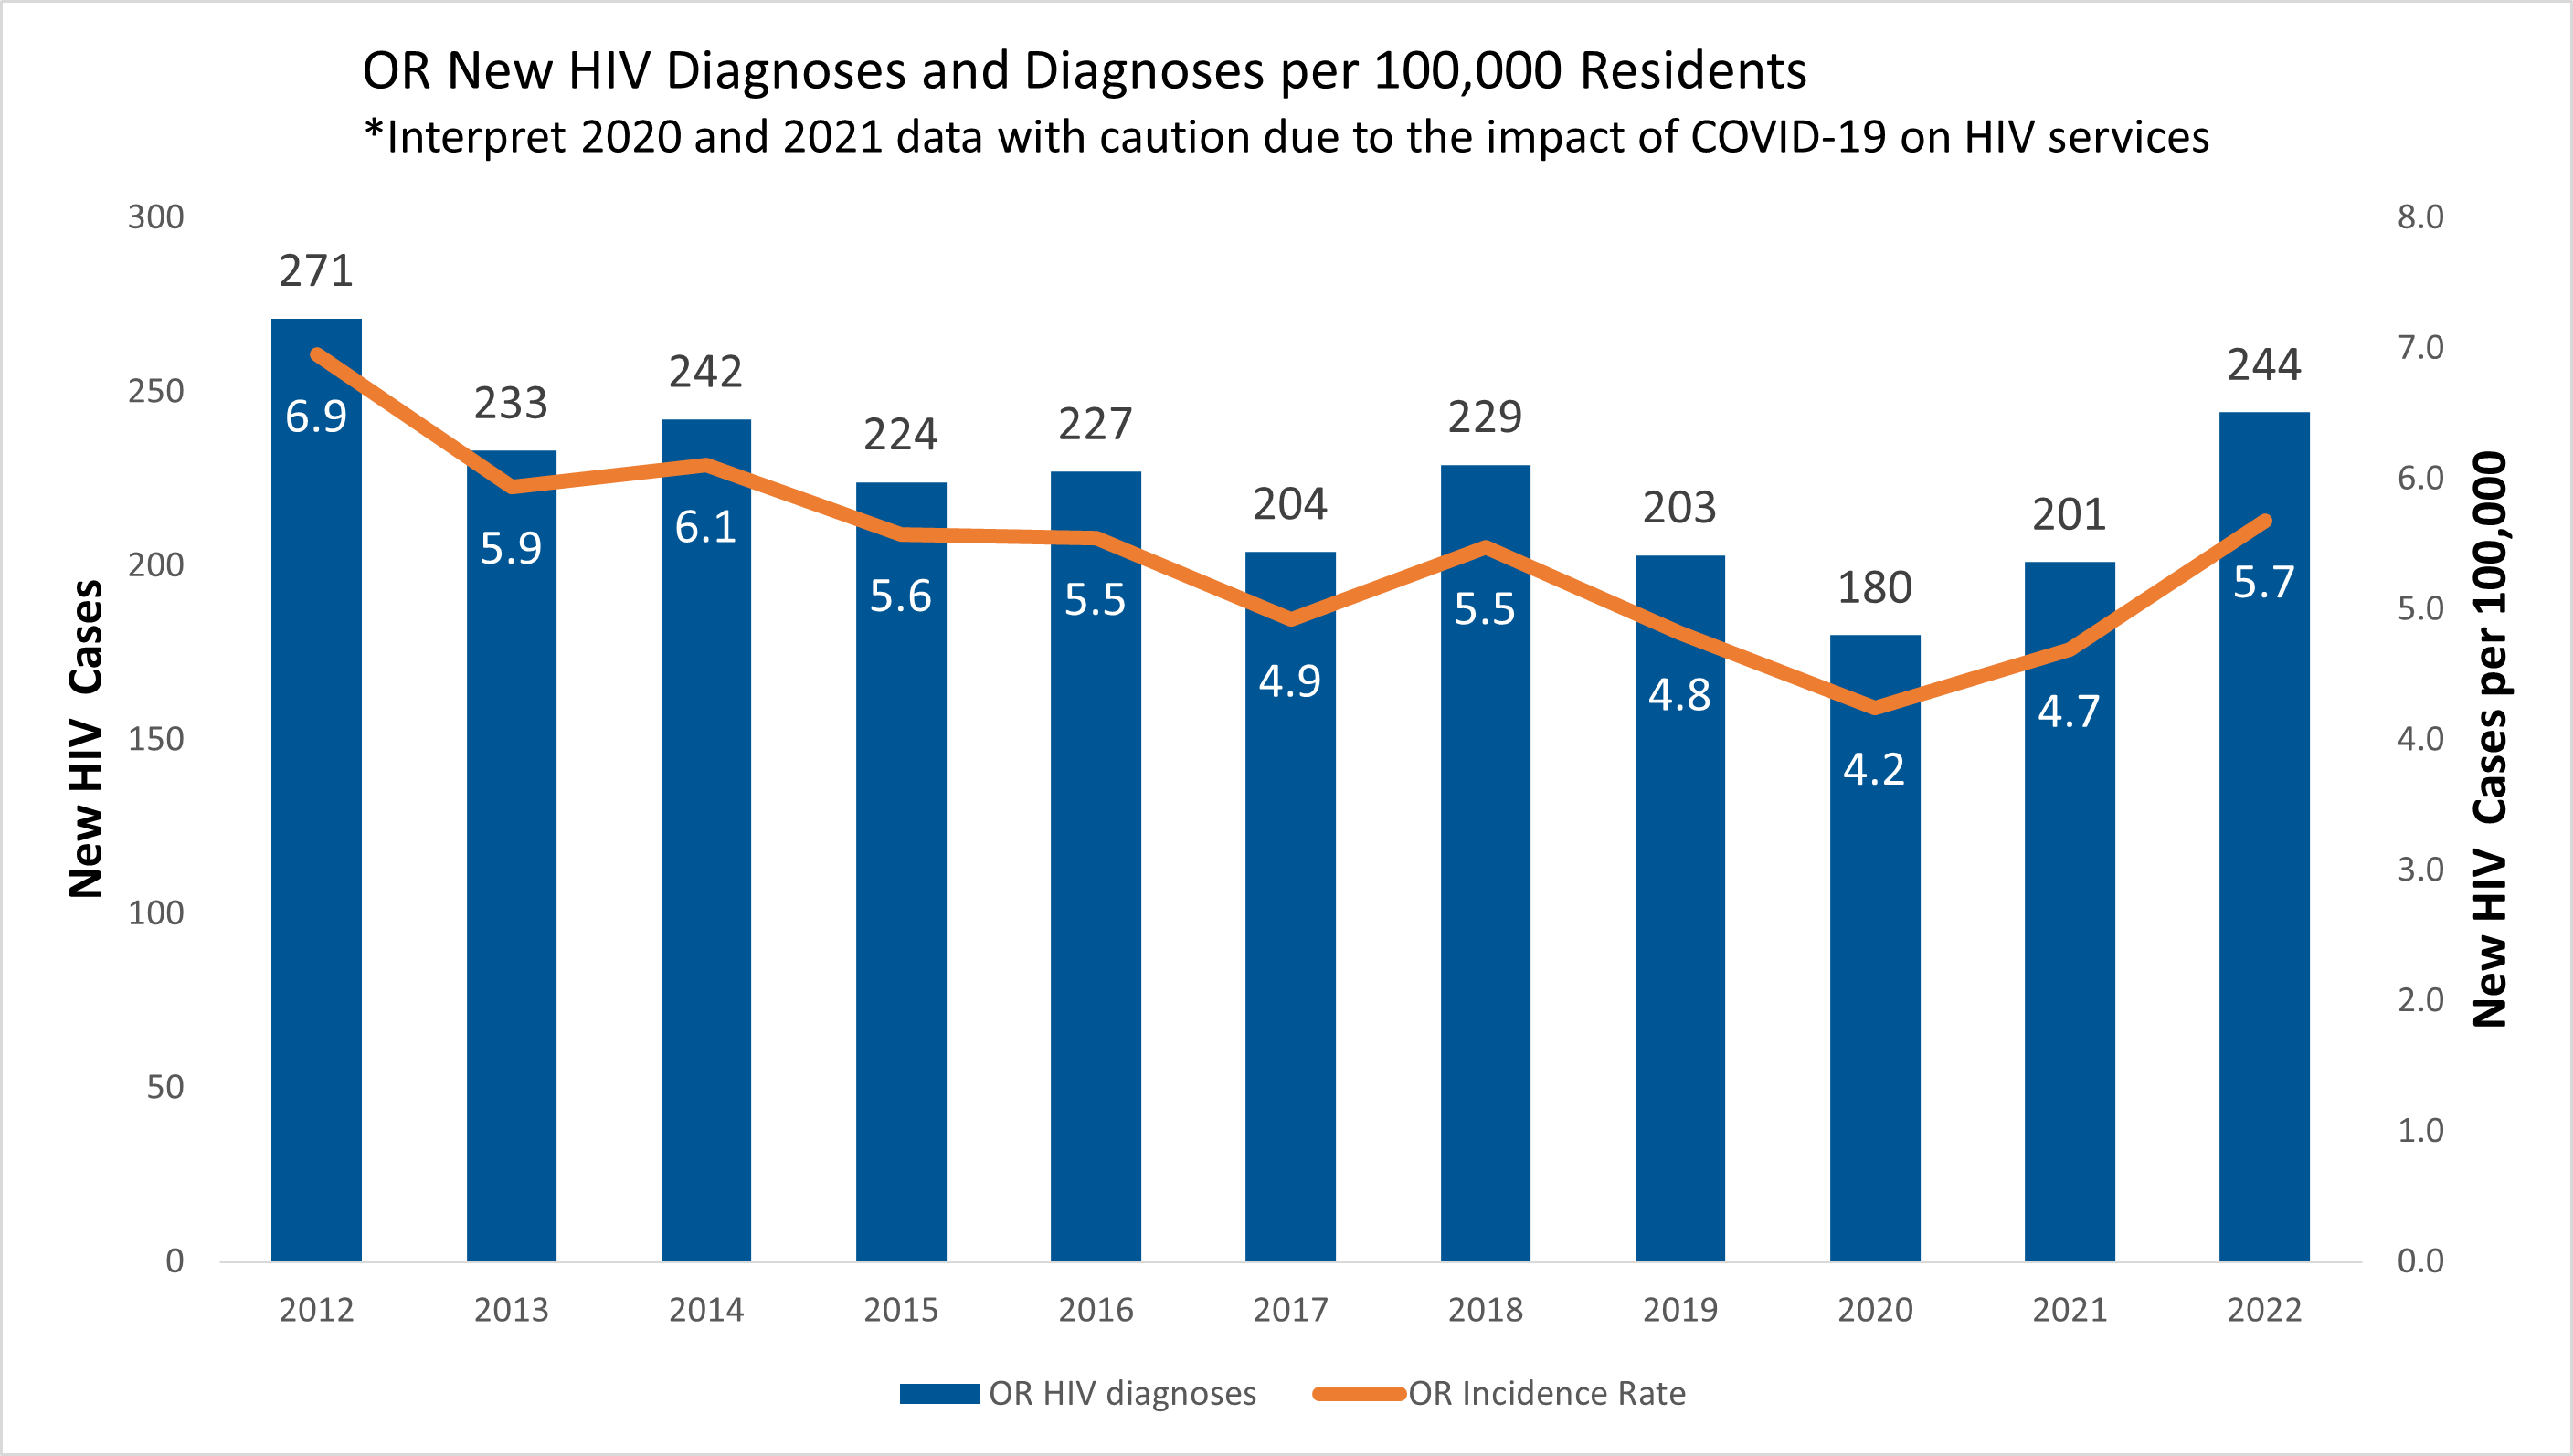 Annual HIV diagnoses in Oregon from 2012 (271) to 2022 (244) and diagnoses per 100,000 residents from 2012 (6.9) to 2022 (5.7).